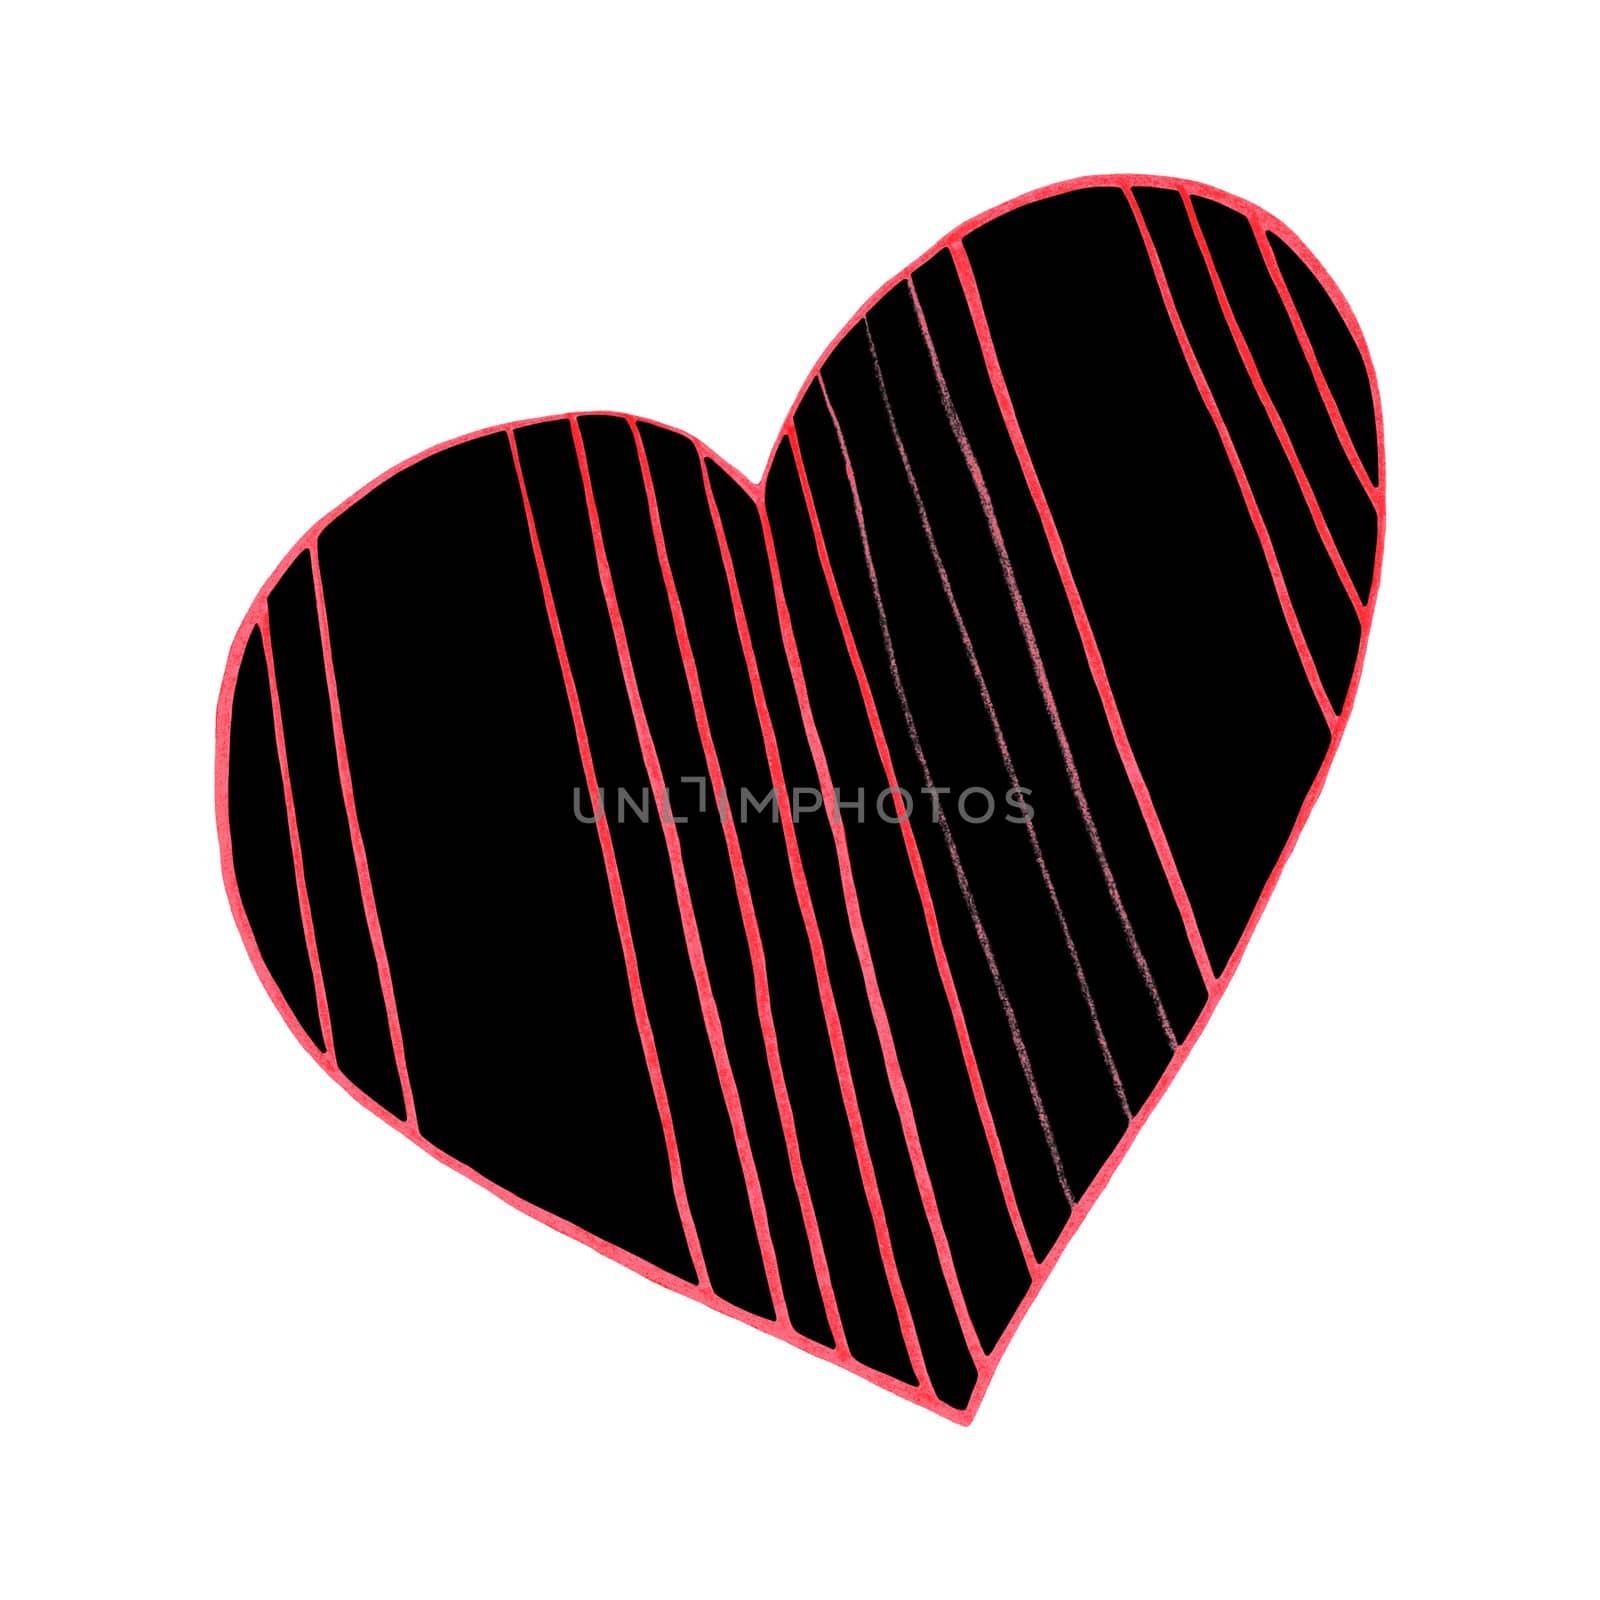 Red and Black Heart Drawn by Colored Pencil. The Sign of World Heart Day. Symbol of Valentines Day. Heart Shape Isolated on White Background.